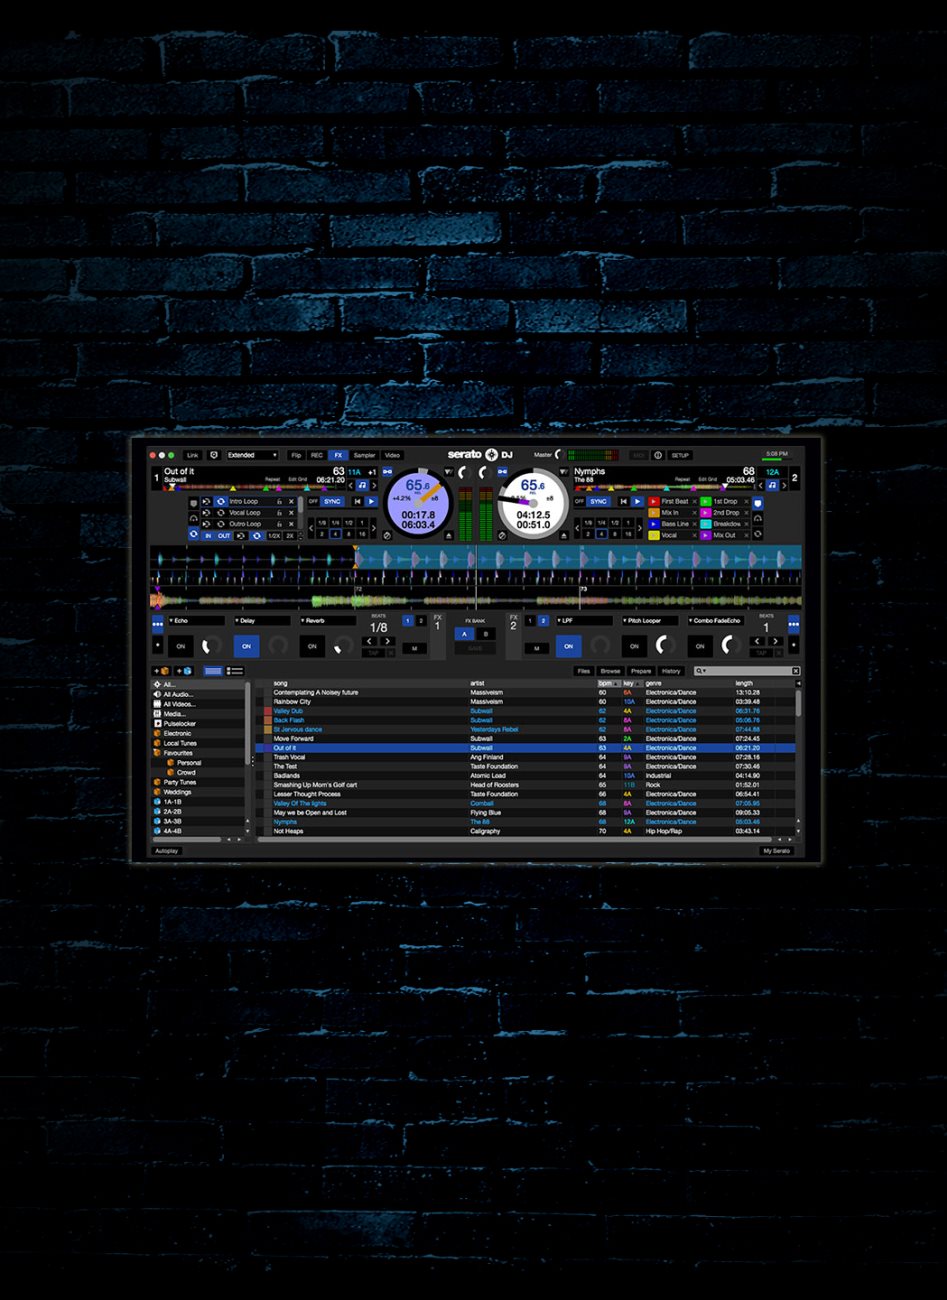 Serato scratch live drivers windows 7 download and product key